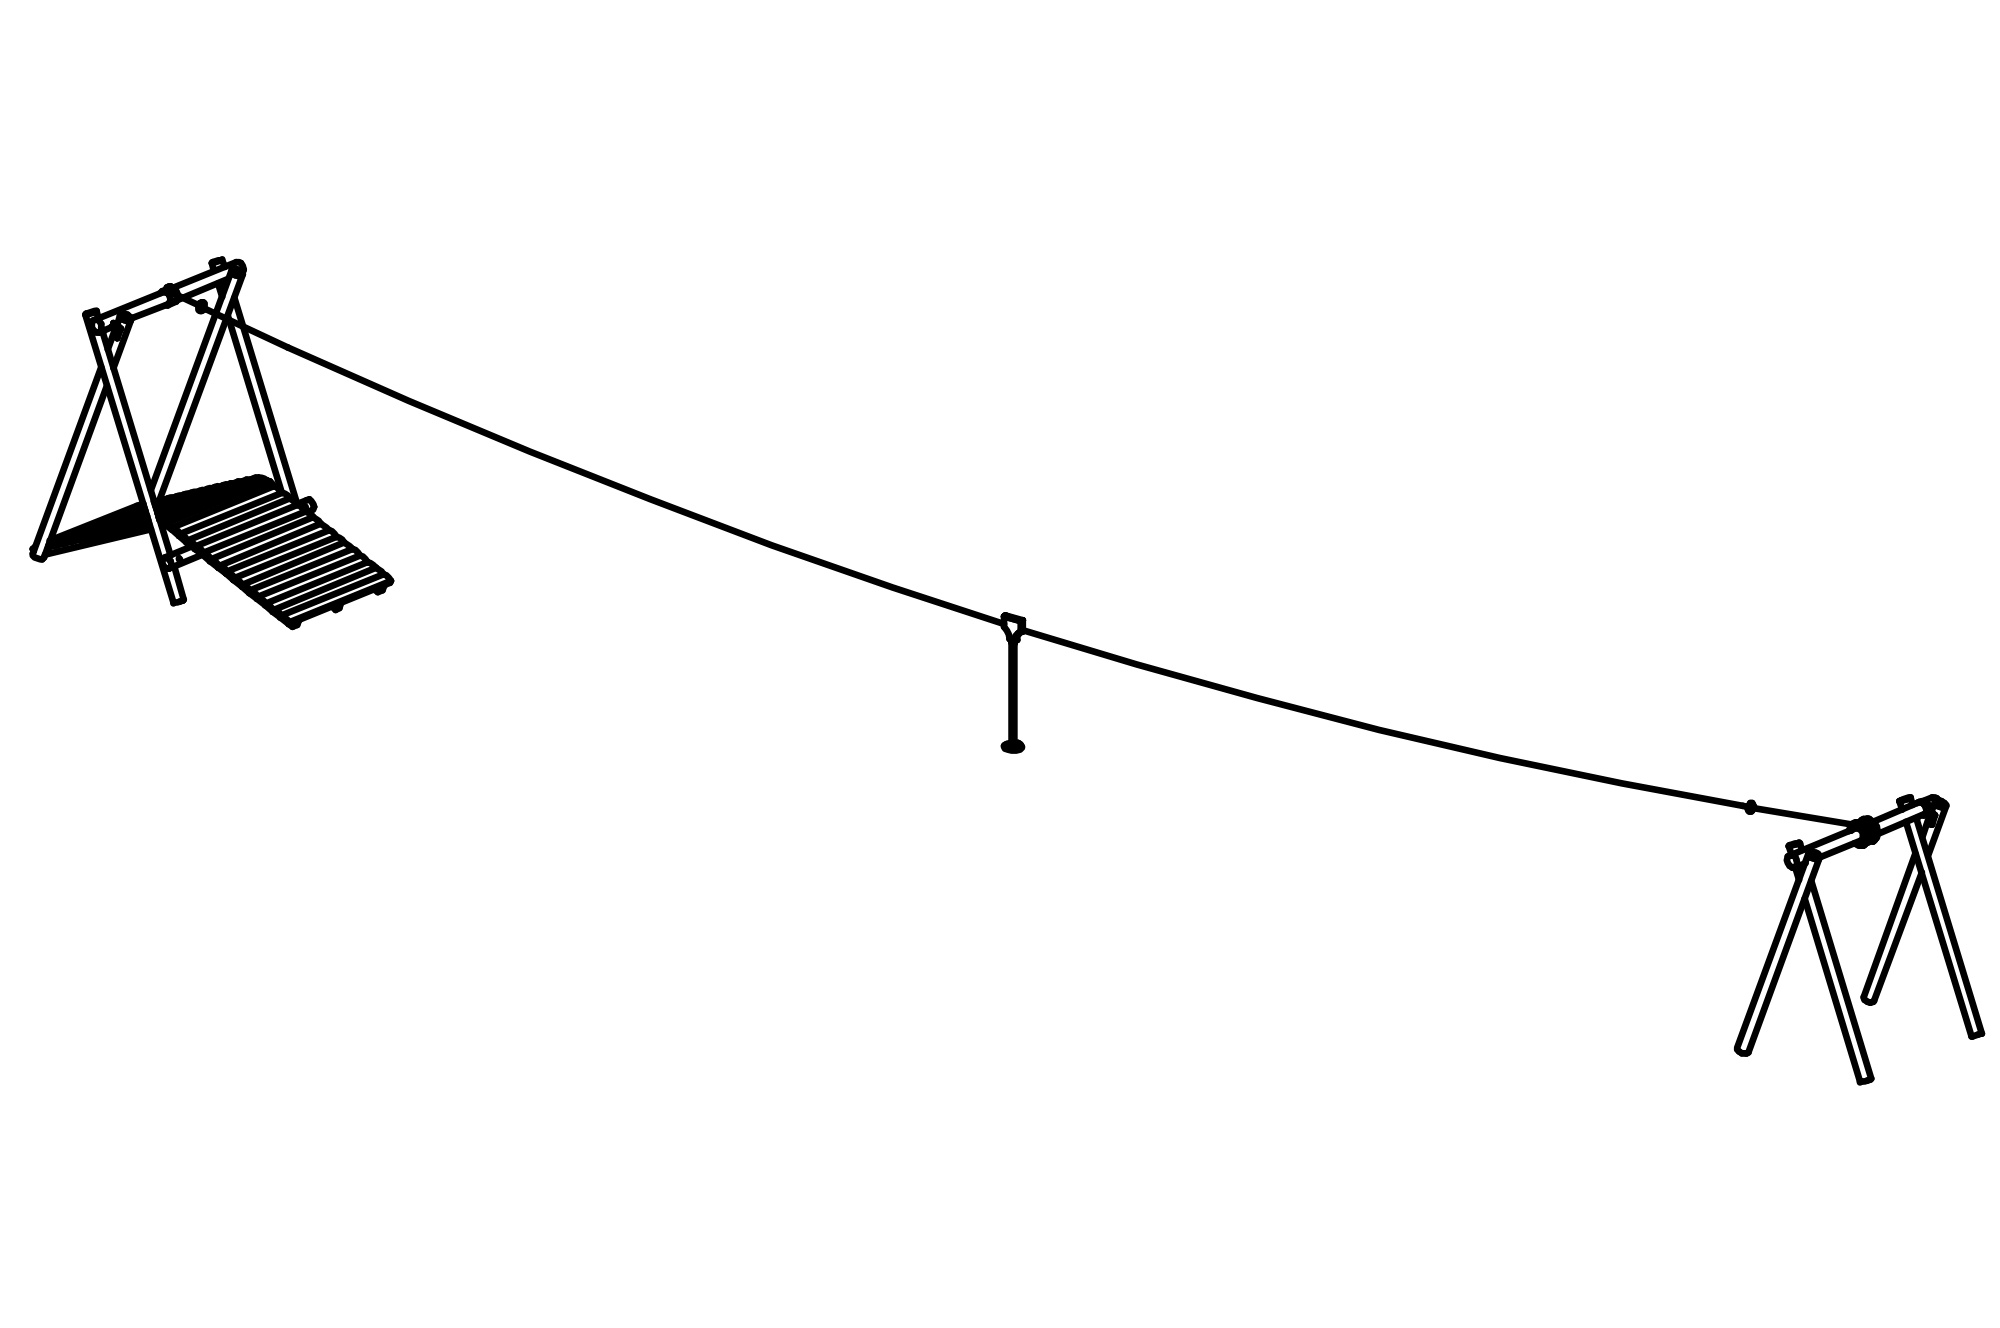 Cable Way with Ramp, length = 30 m